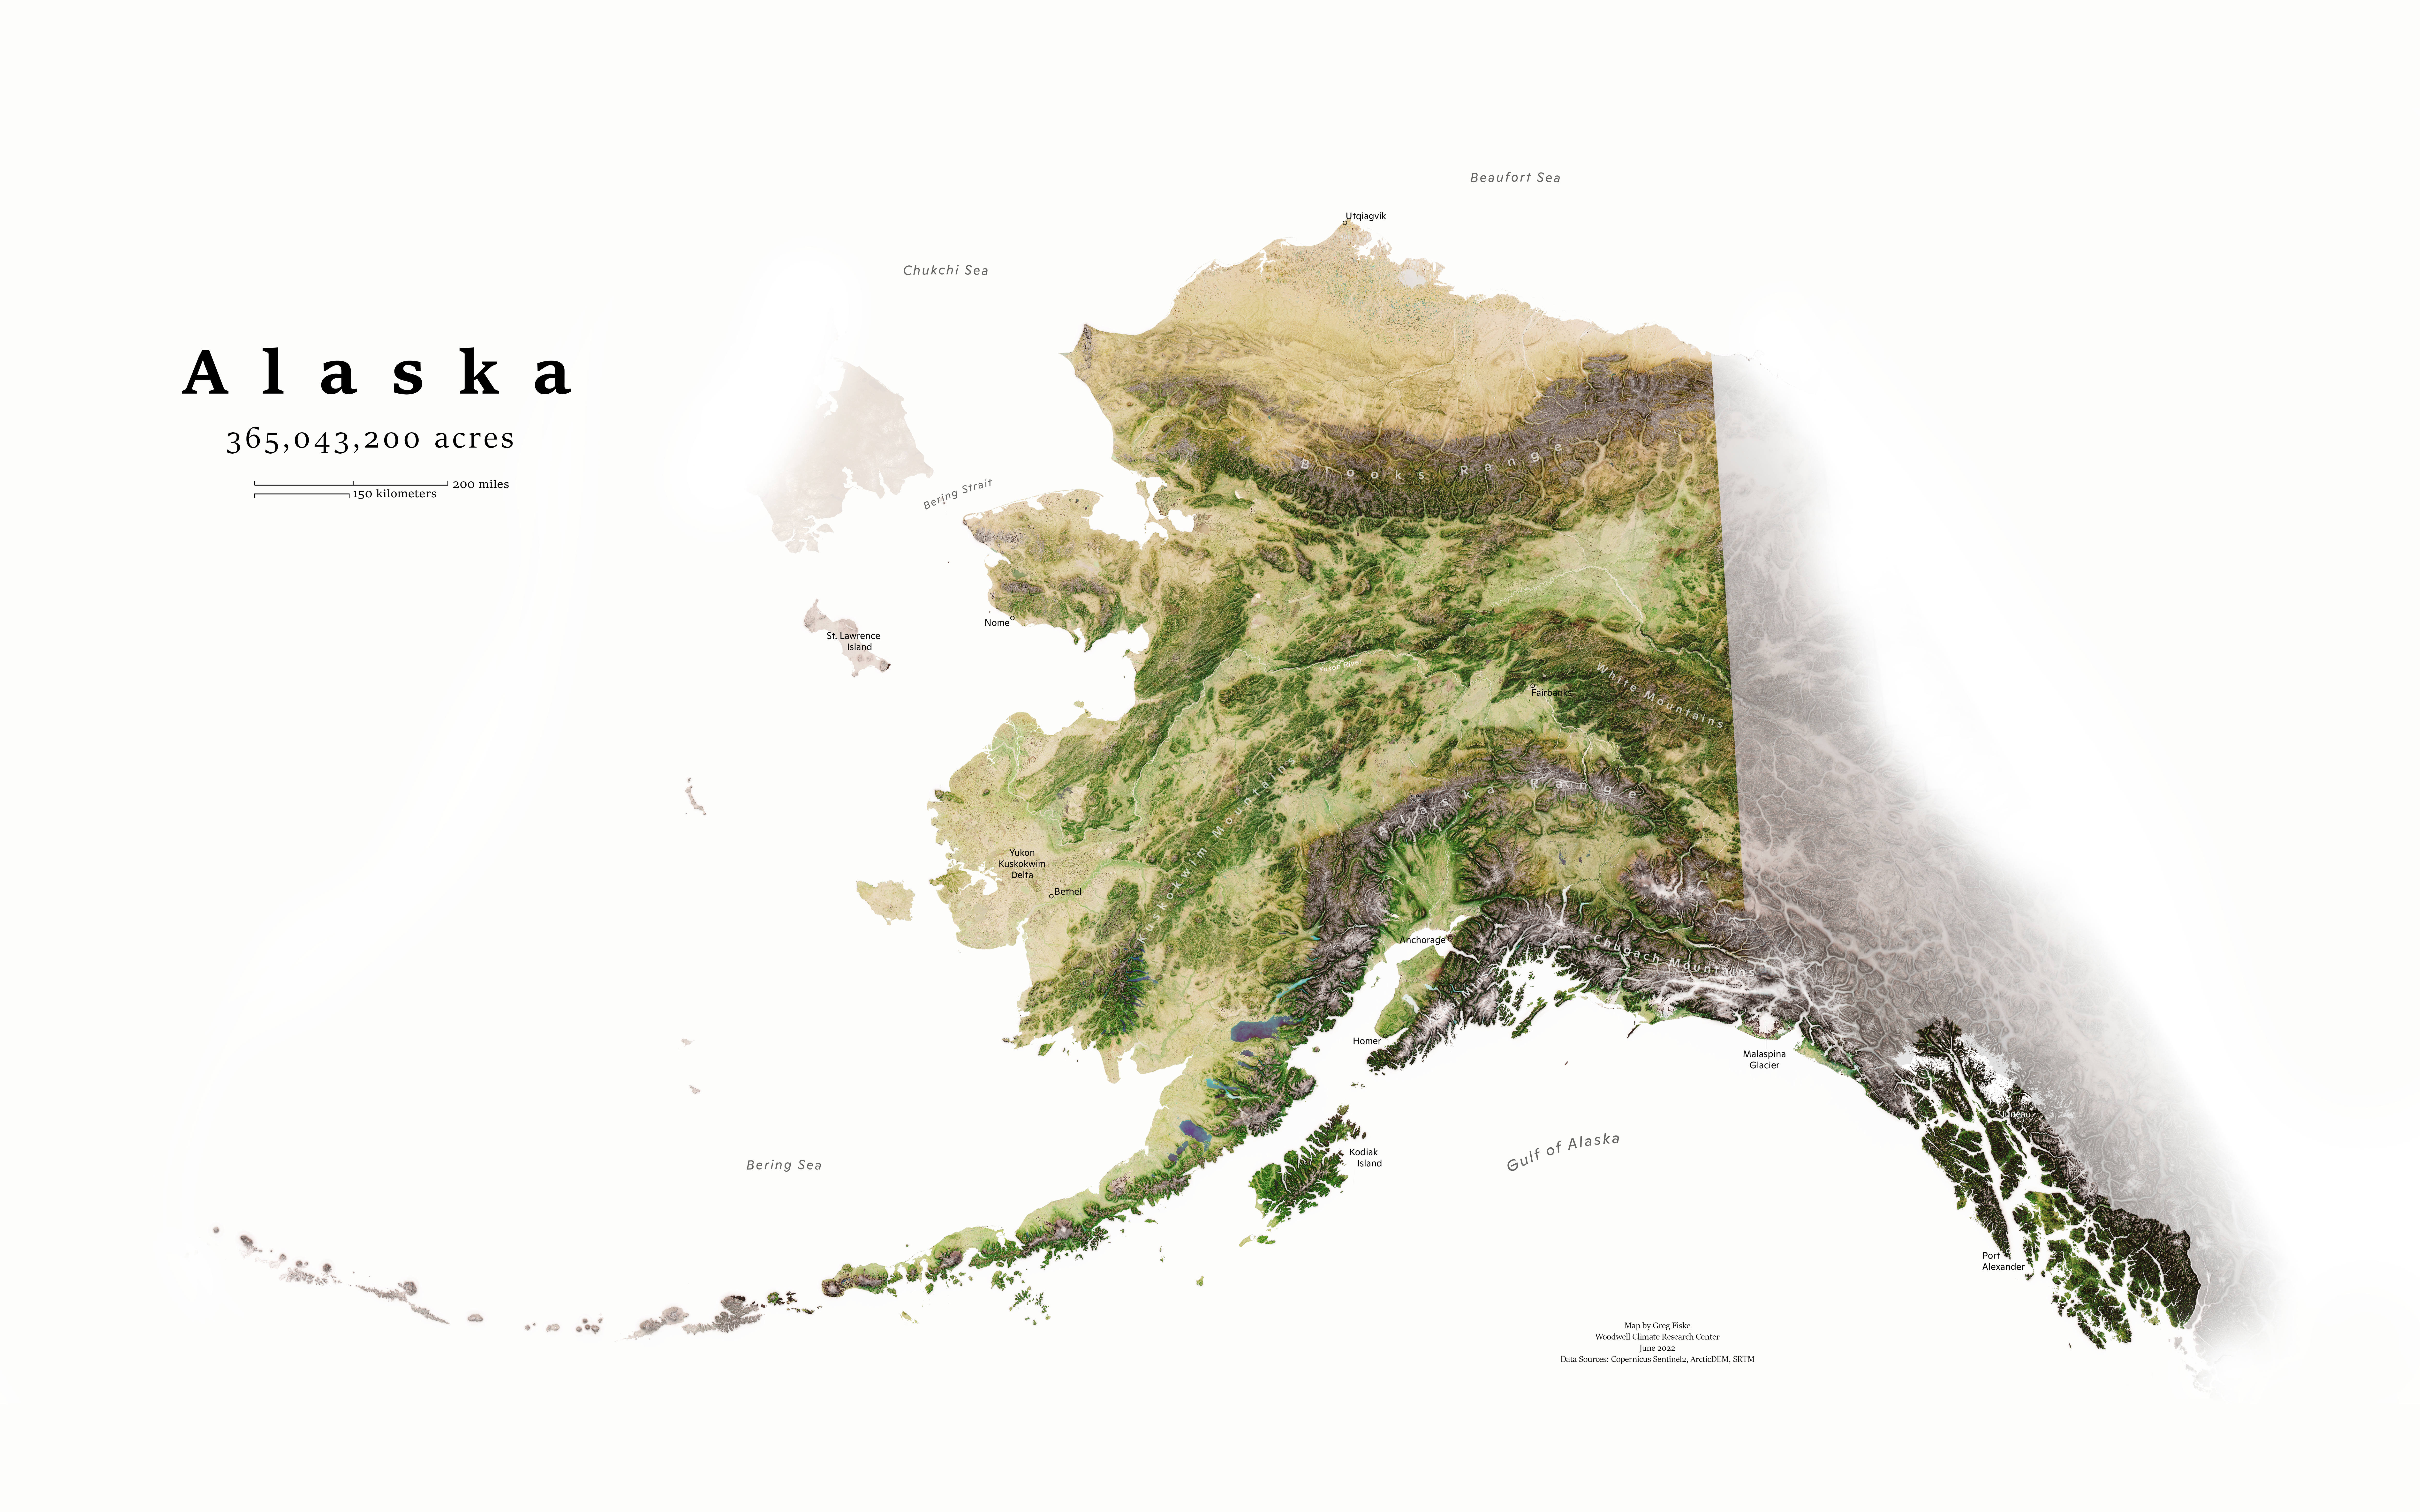 a topographical map of the state of Alaska rendered in shades of green and brown